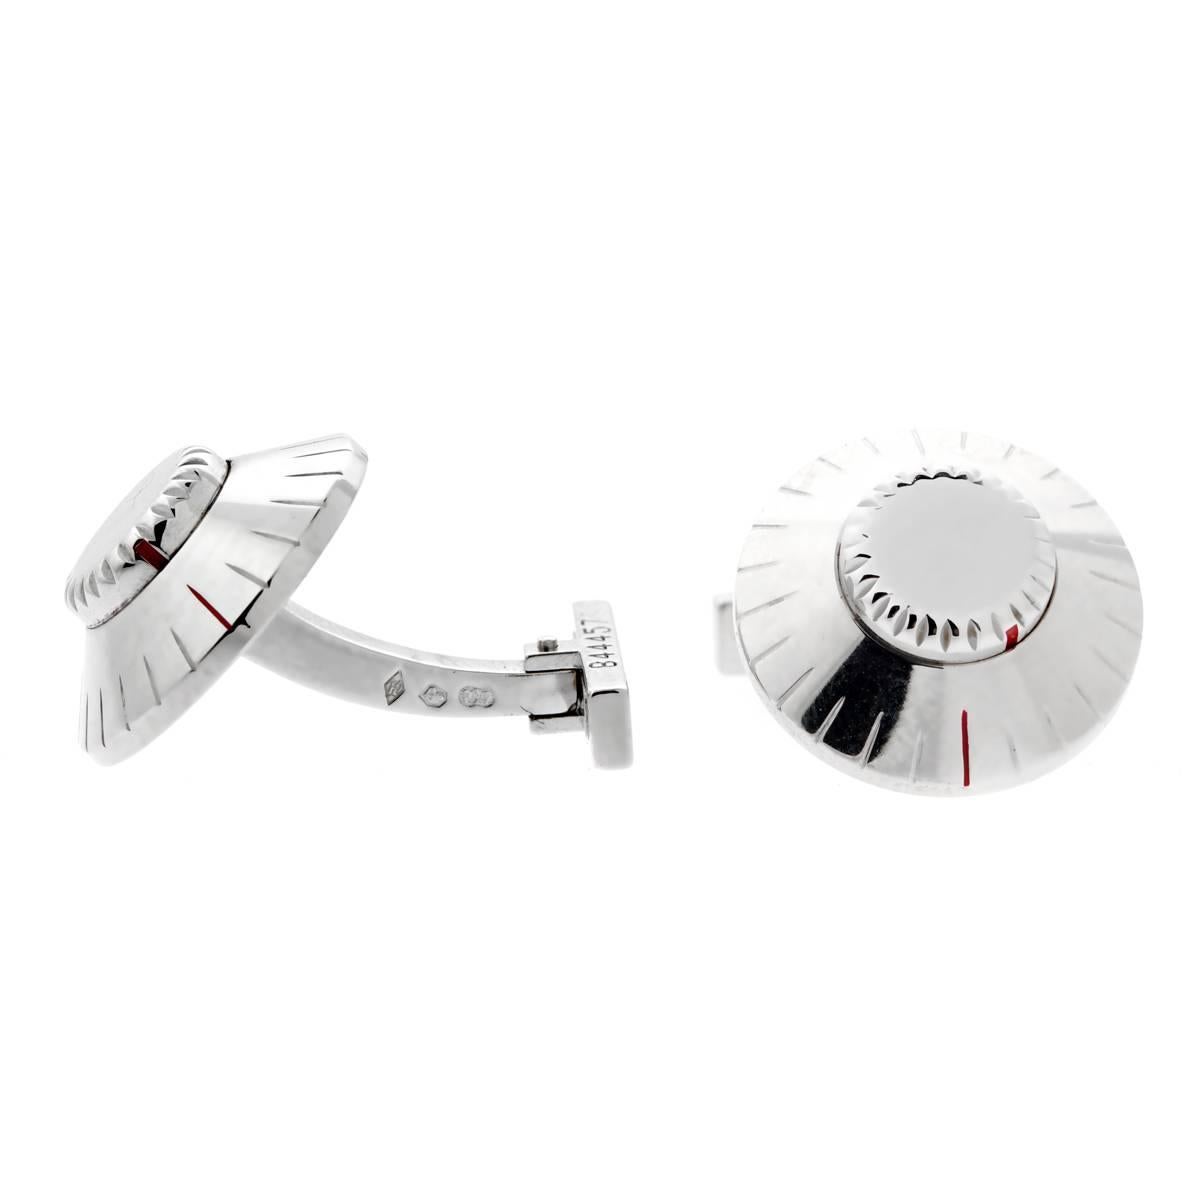 A pair of Cartier cufflinks in a safe combination motif featuring a rotating center station crafted in 18k white gold.

Sku:872